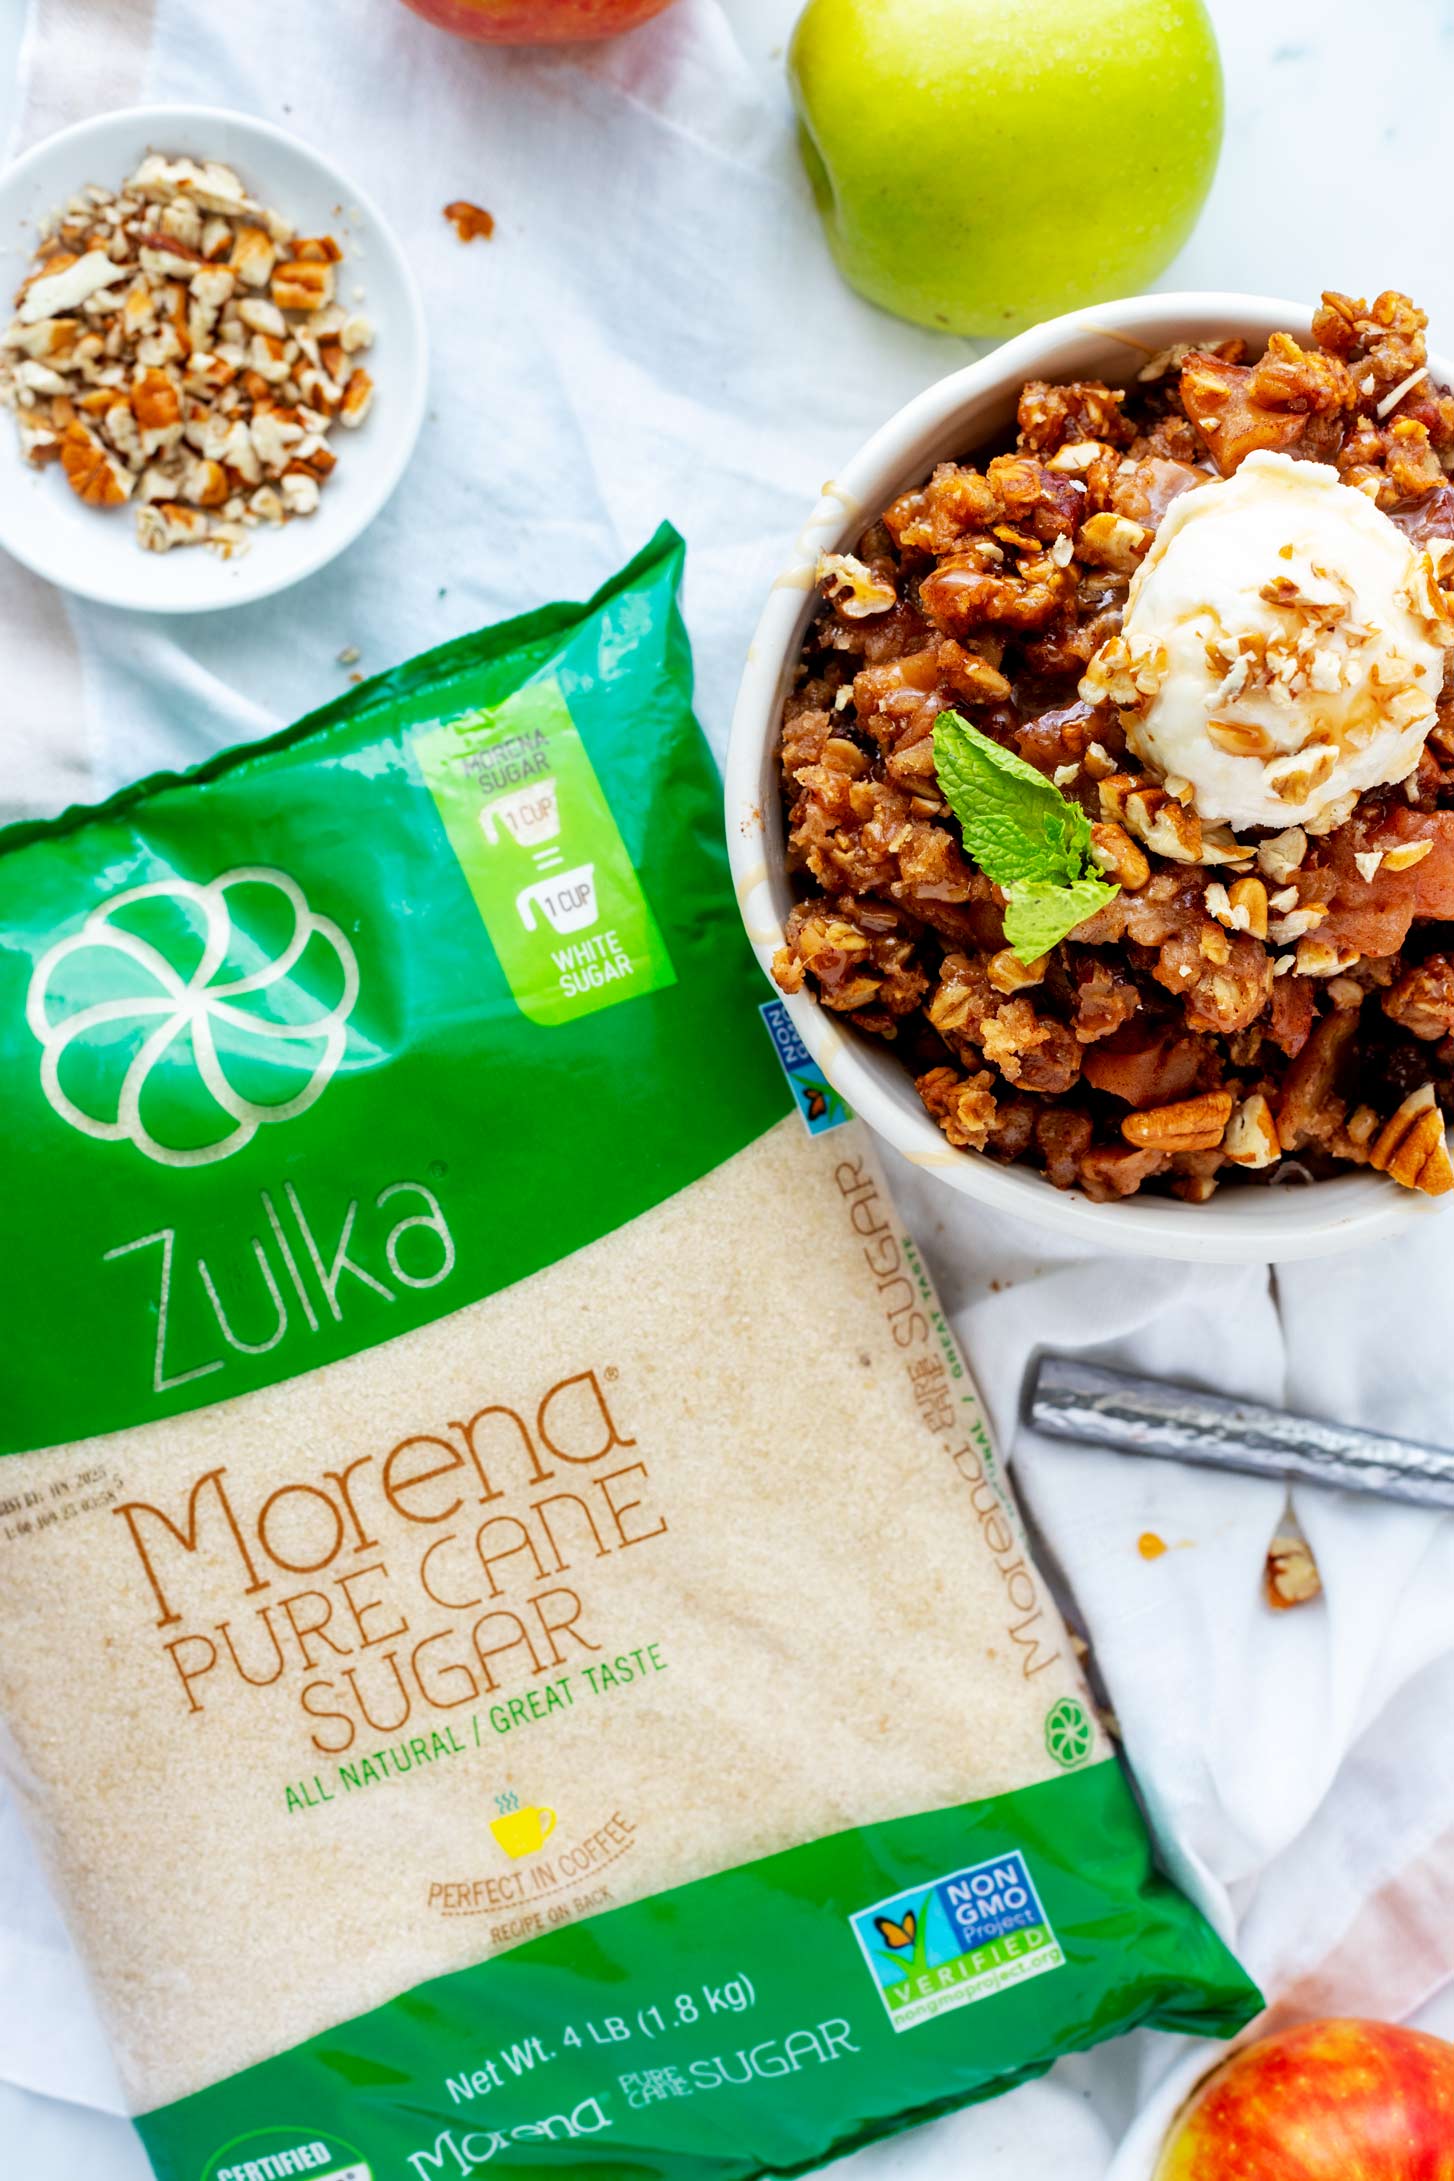 Overhead photo of Zulka Morena pure cane sugar sitting next to a slow cooker apple crisp.